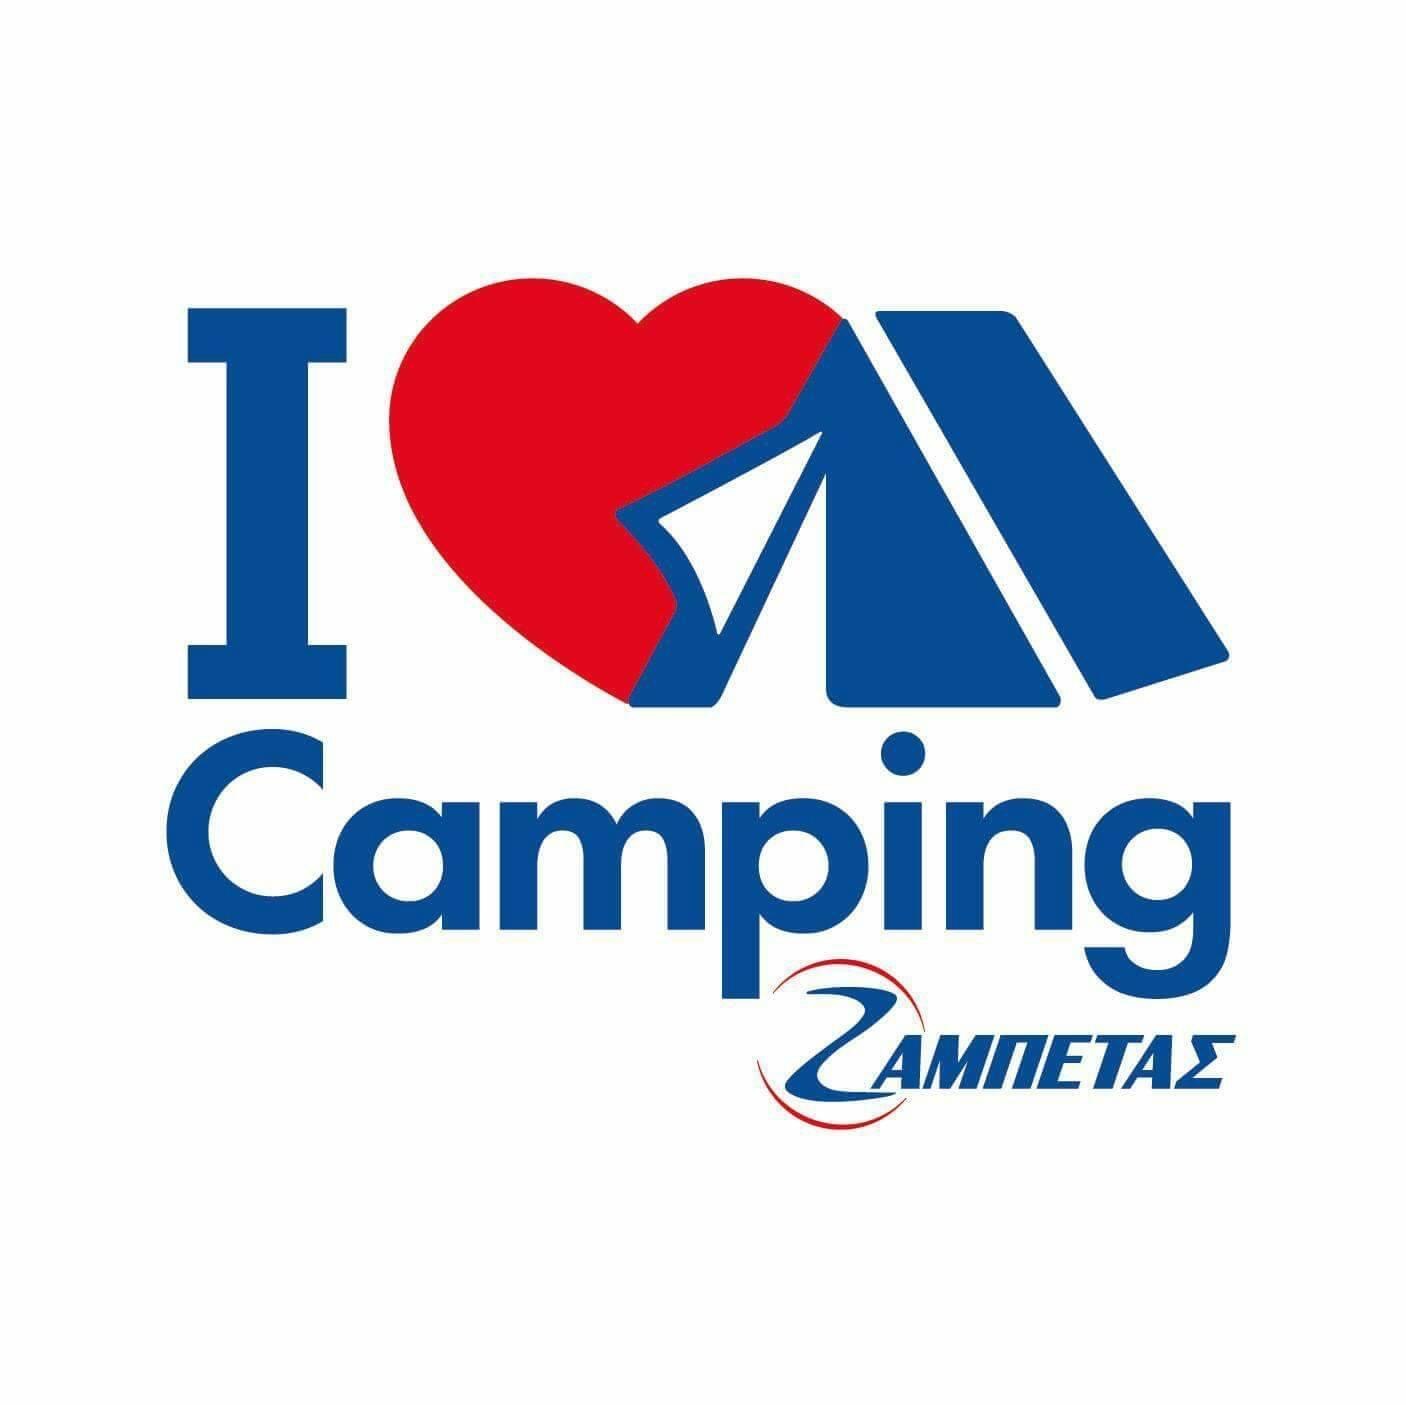 astronaut Mobiliseren Festival Zampetas Camping Megastore Sticker for iOS & Android | GIPHY